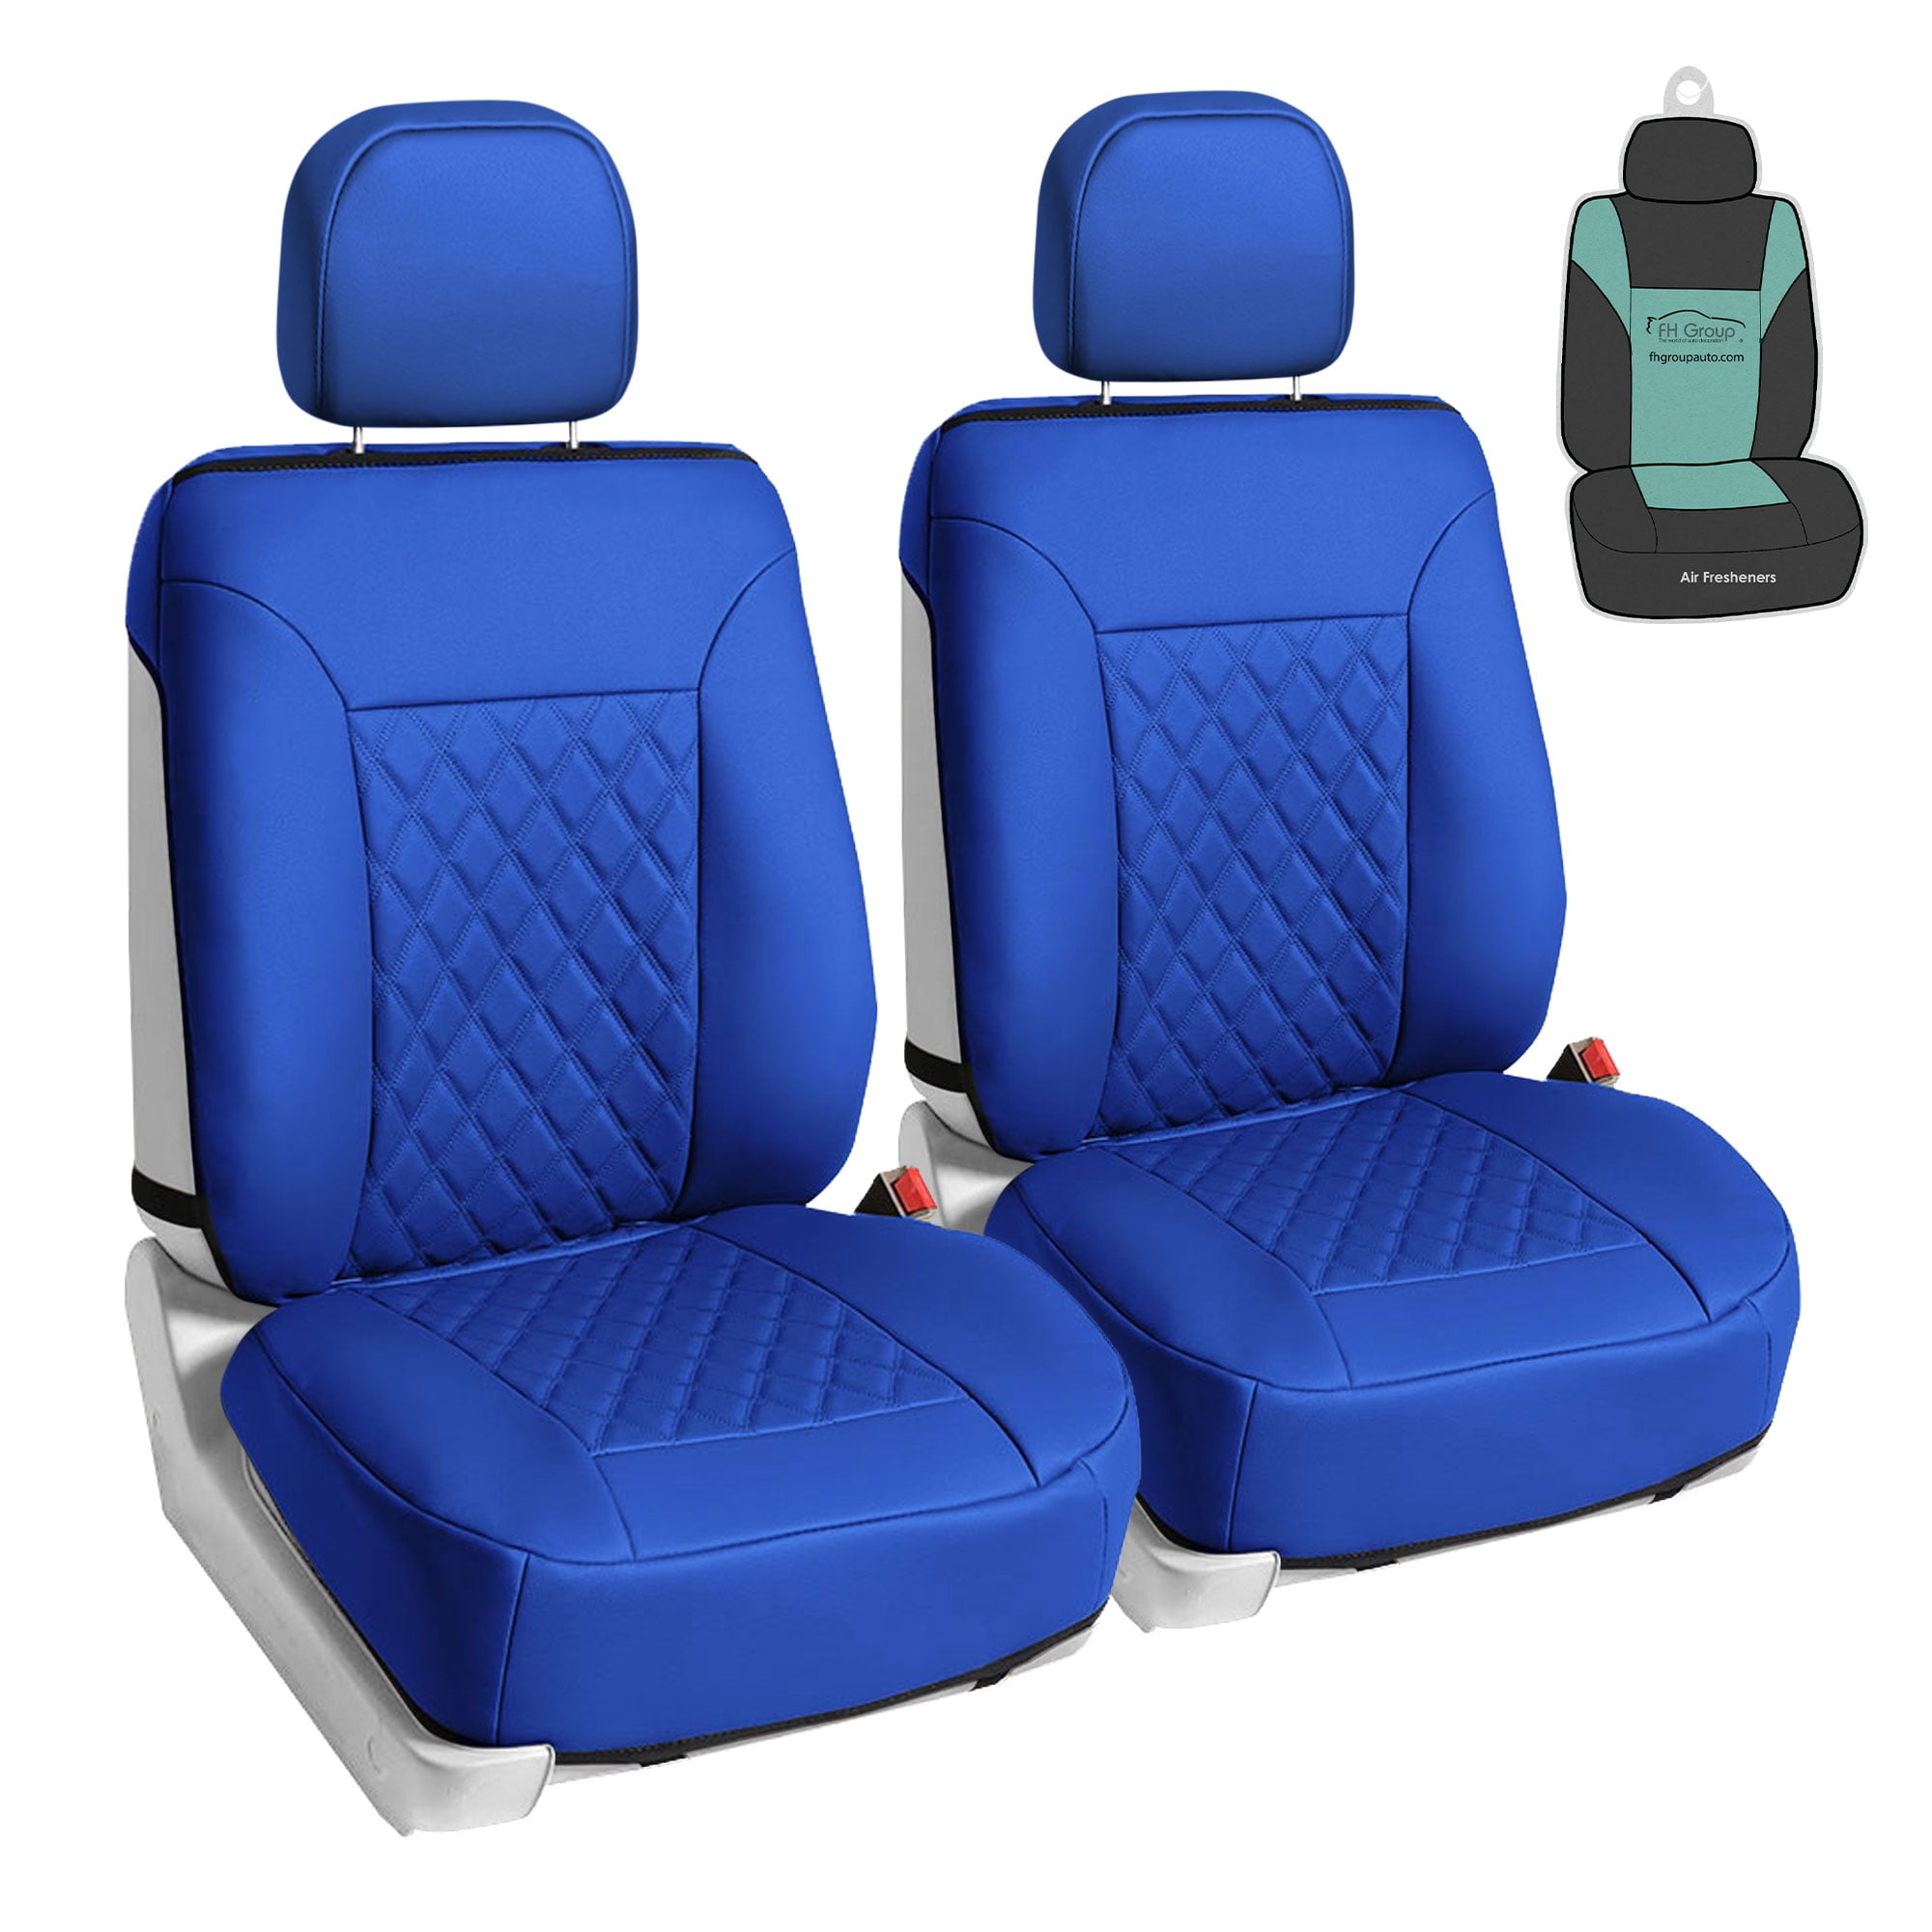 FH Group Ultra Sleek Car Seat Cushions 23 in. x 1 in. x 47 in. Oxford Fabric Front Set, Black